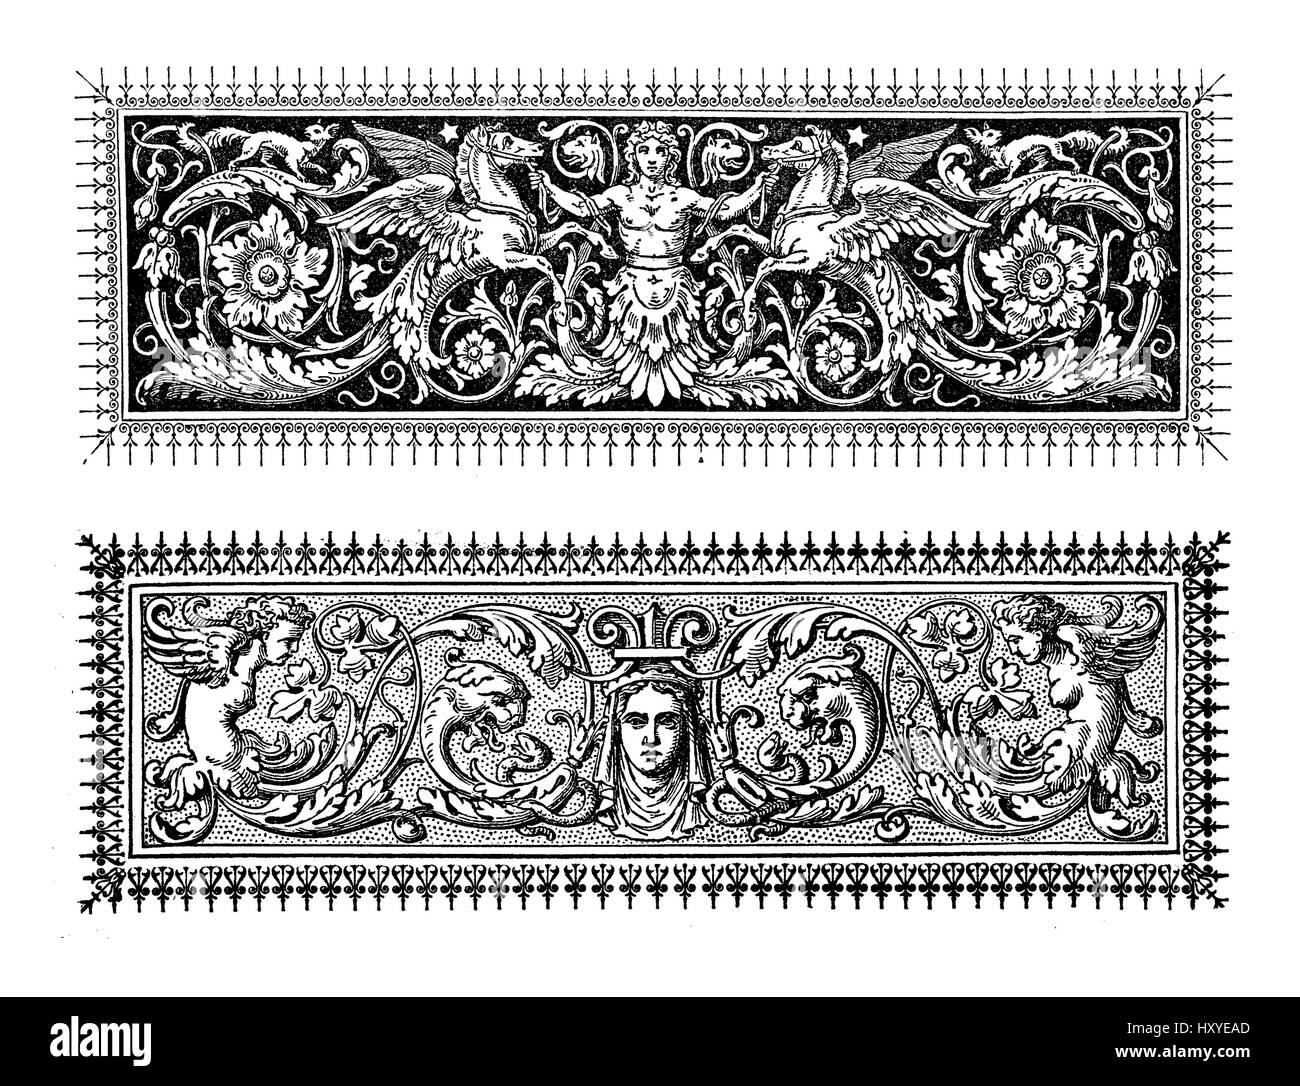 Two richly decorated baroque typographic borders with mythological figures and floreal motives Stock Photo